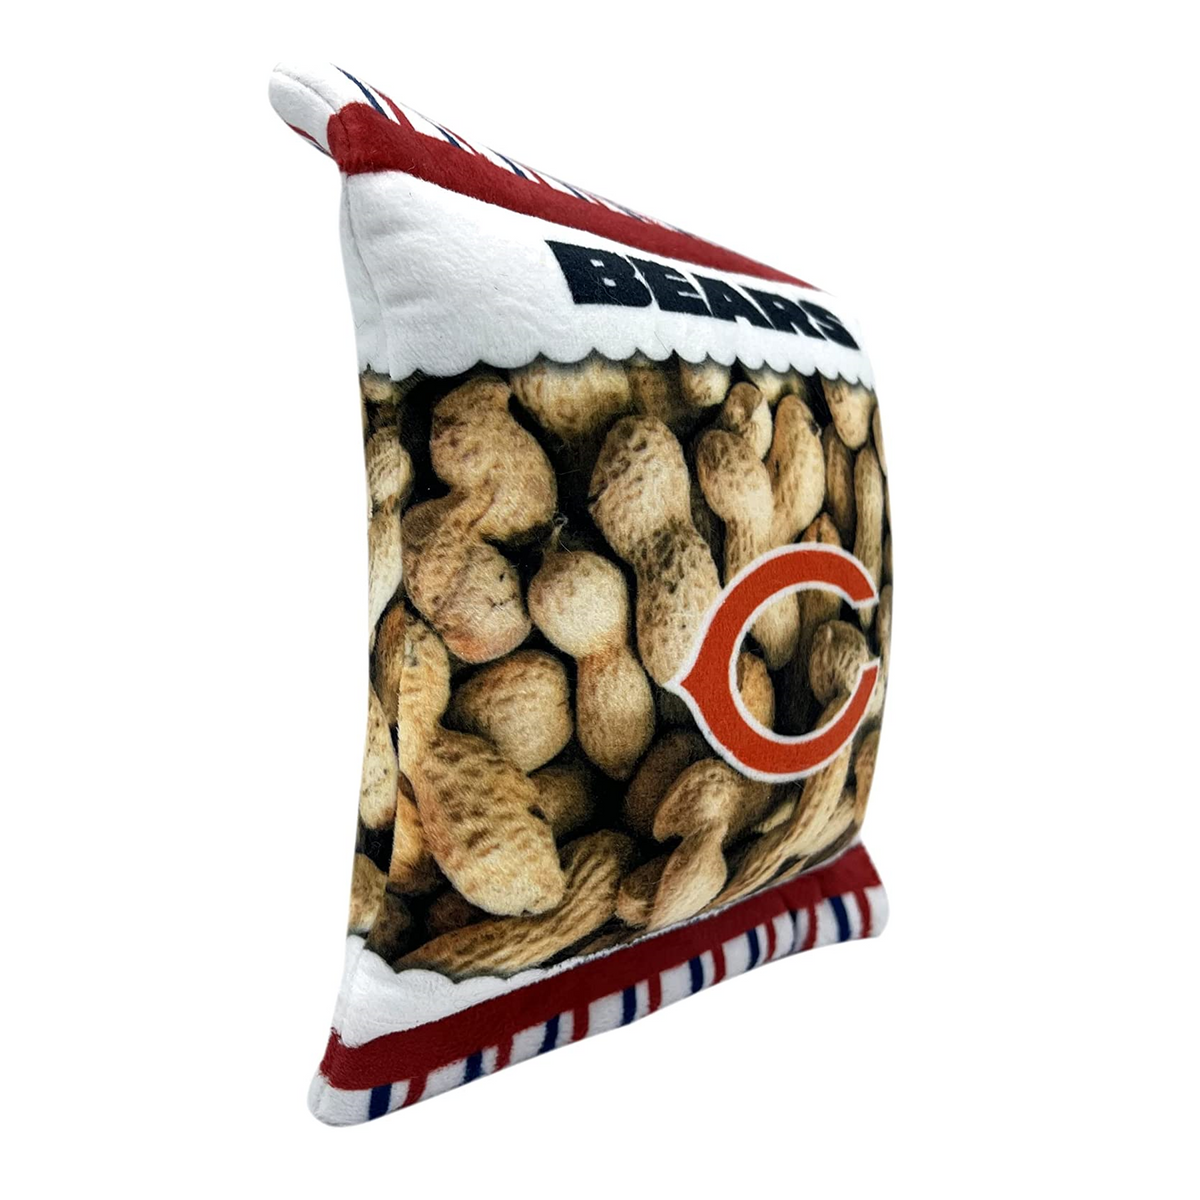 Chicago Bears Peanut Bag Plush Toys - 3 Red Rovers